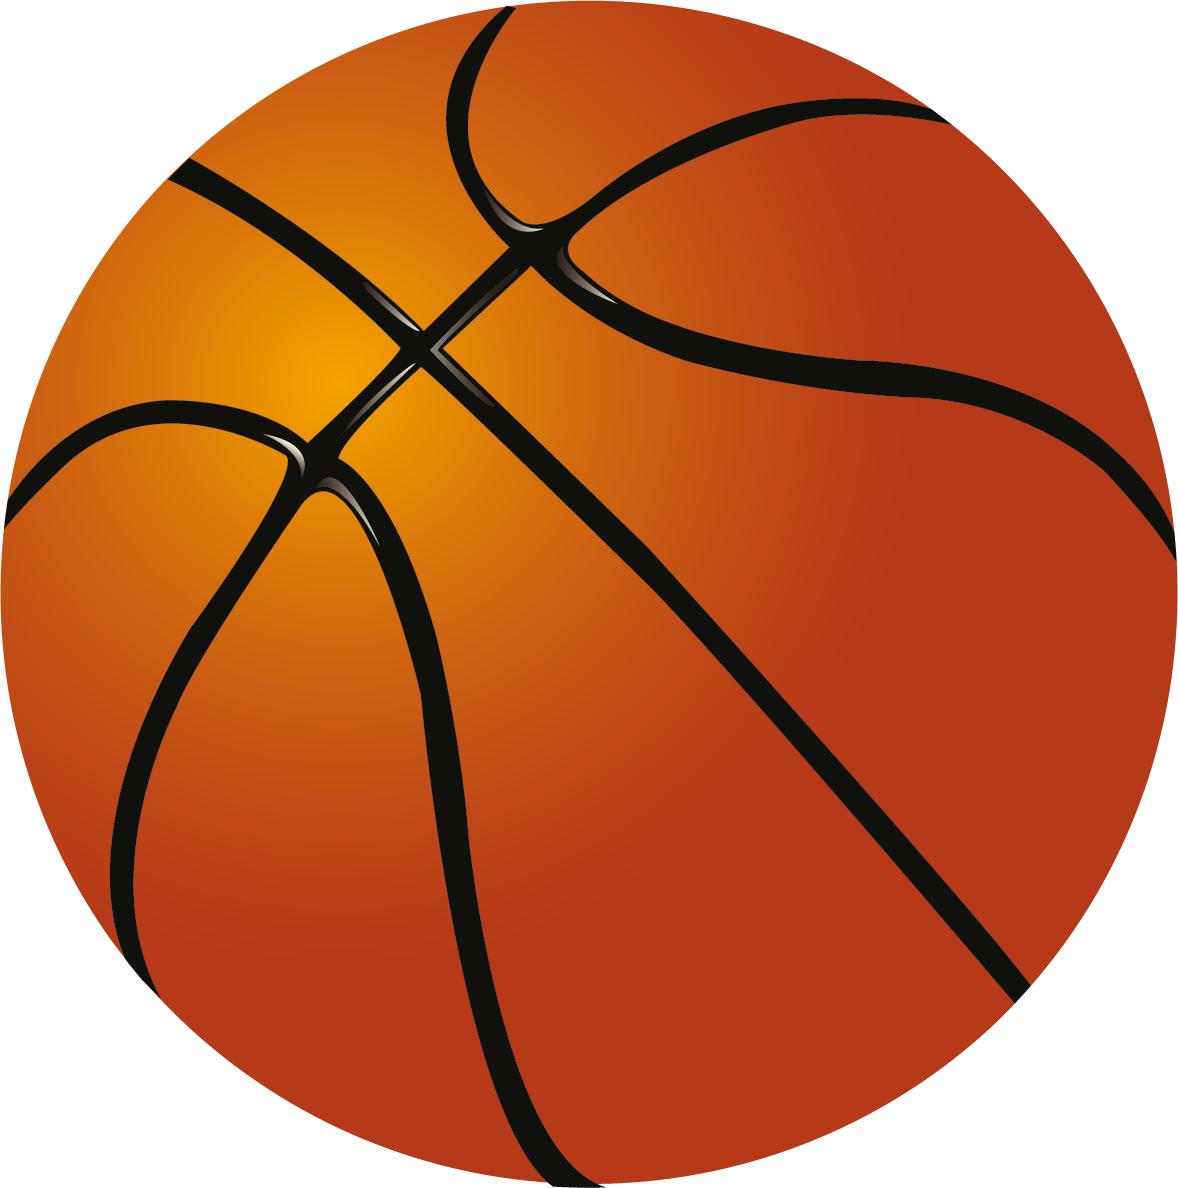 Clipart student basketball. Panda free images recipes